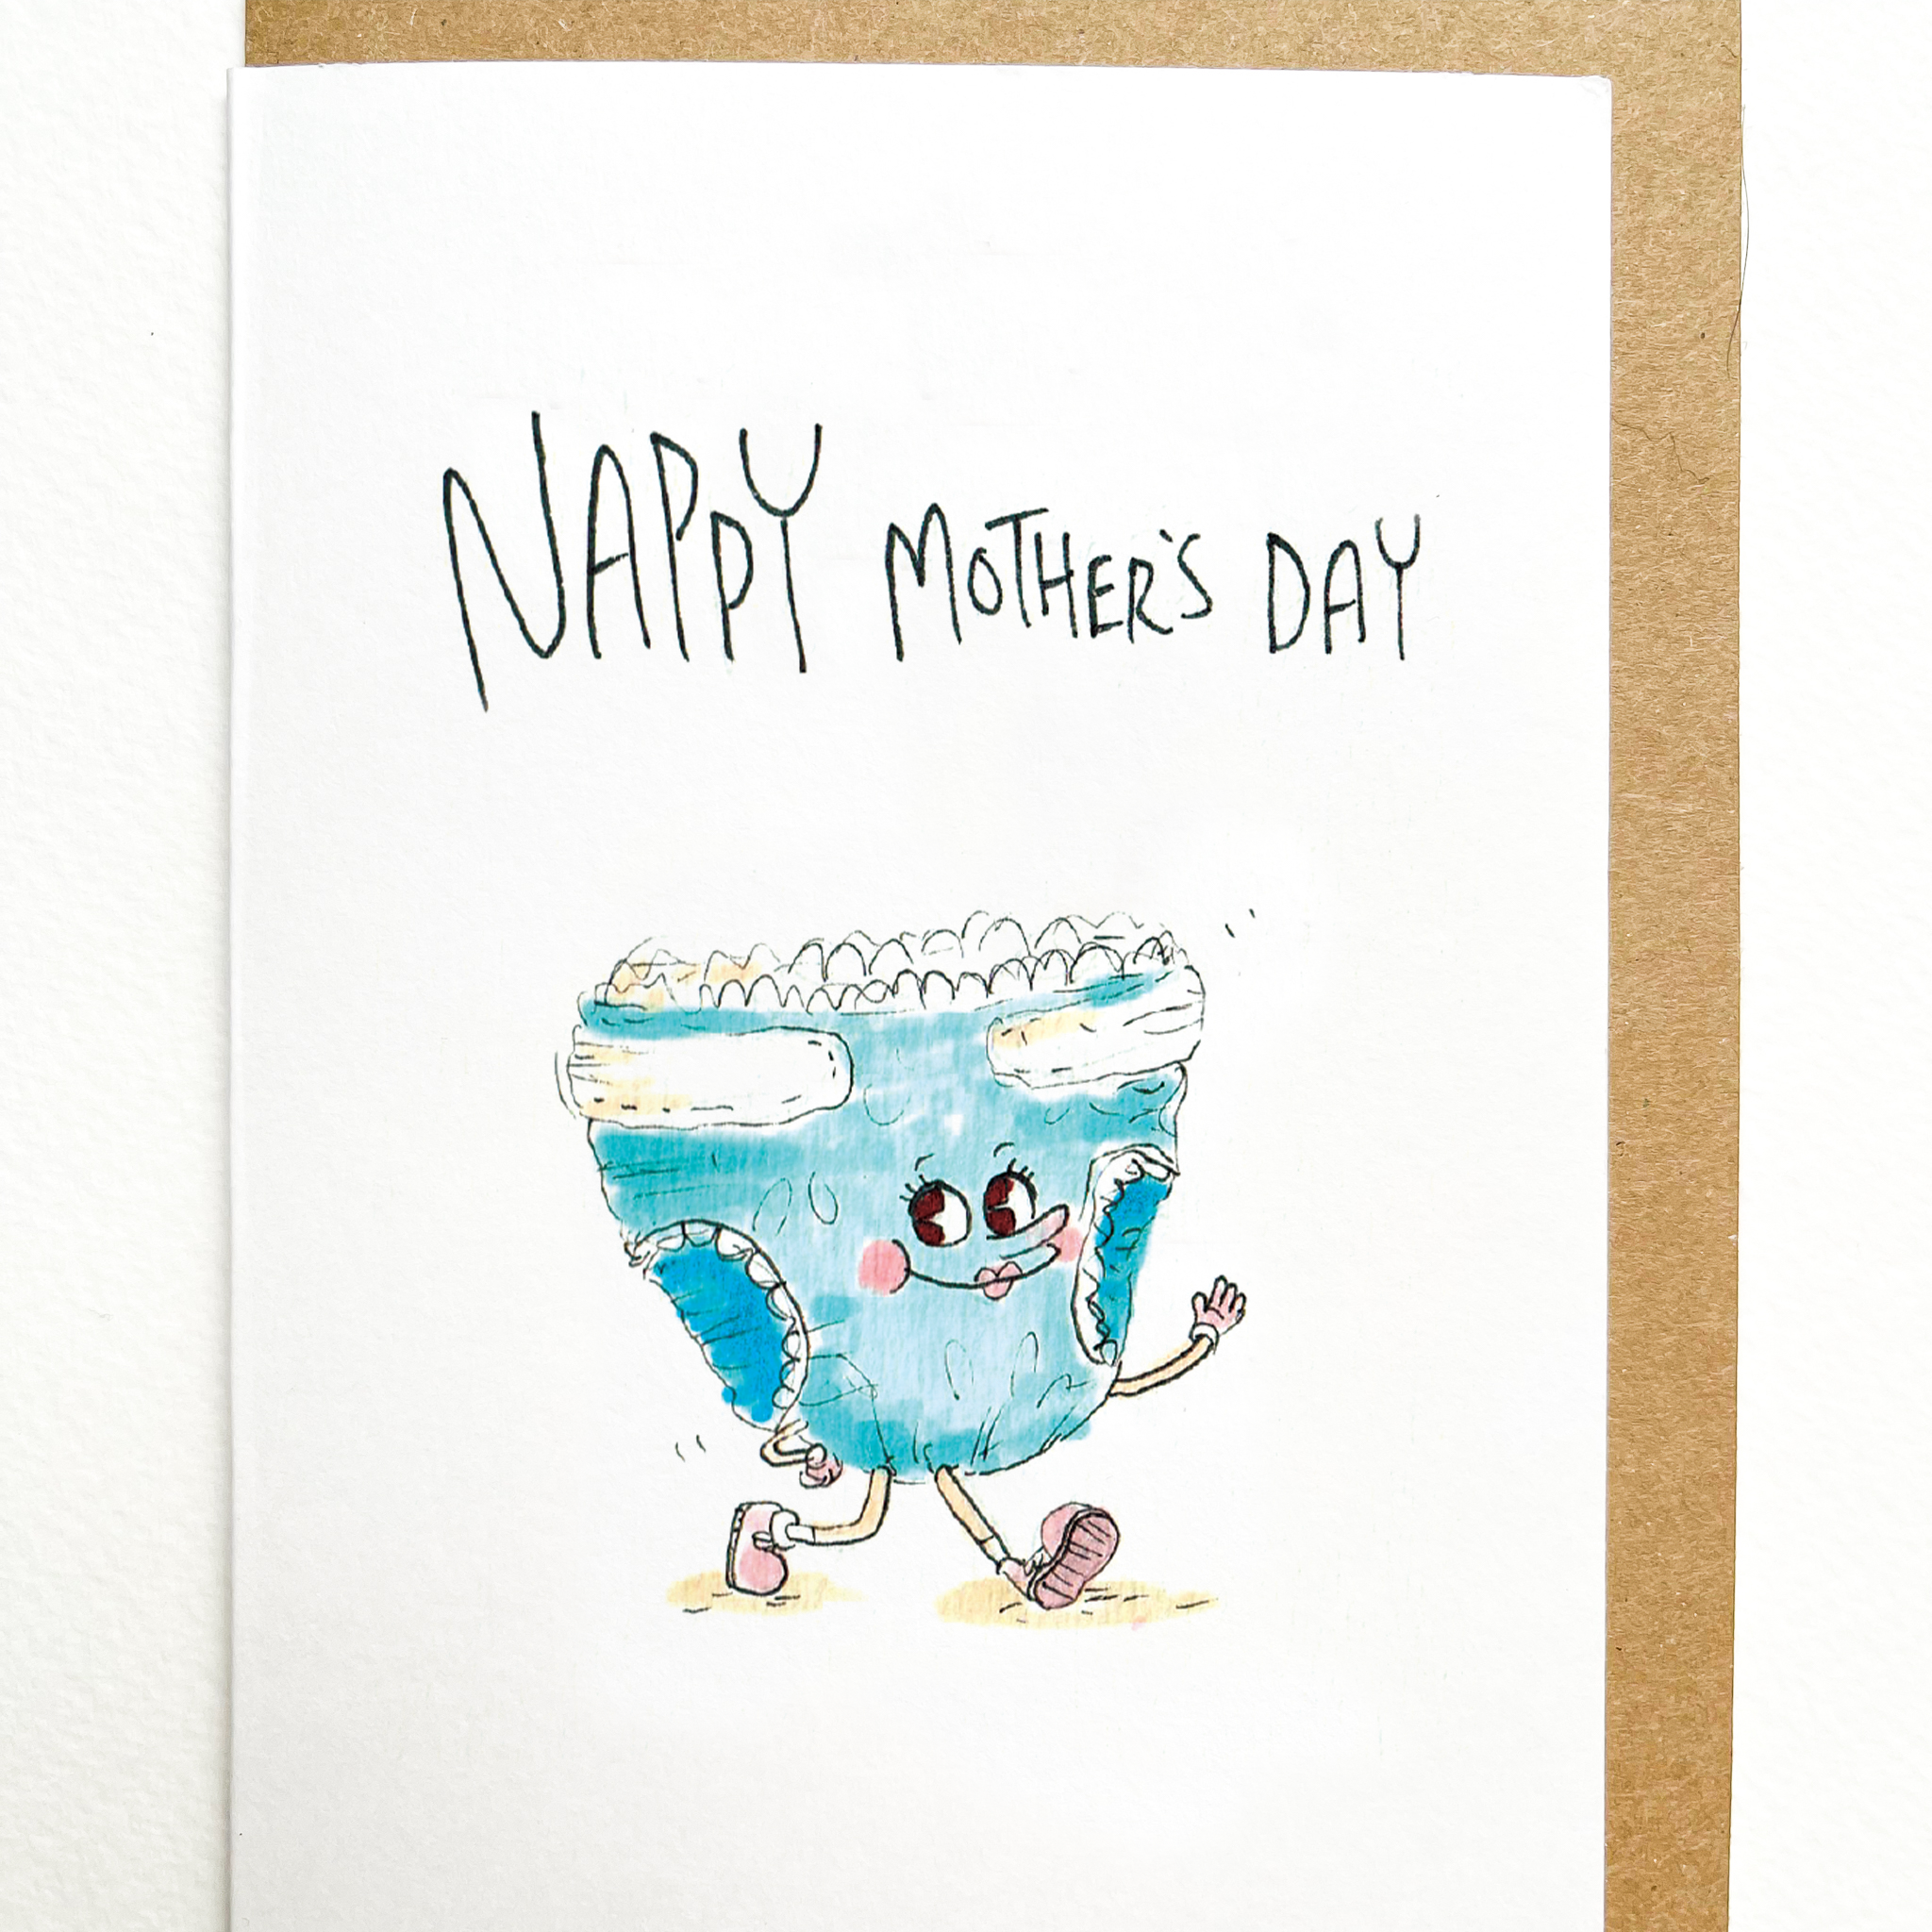 Nappy Mother’s Day